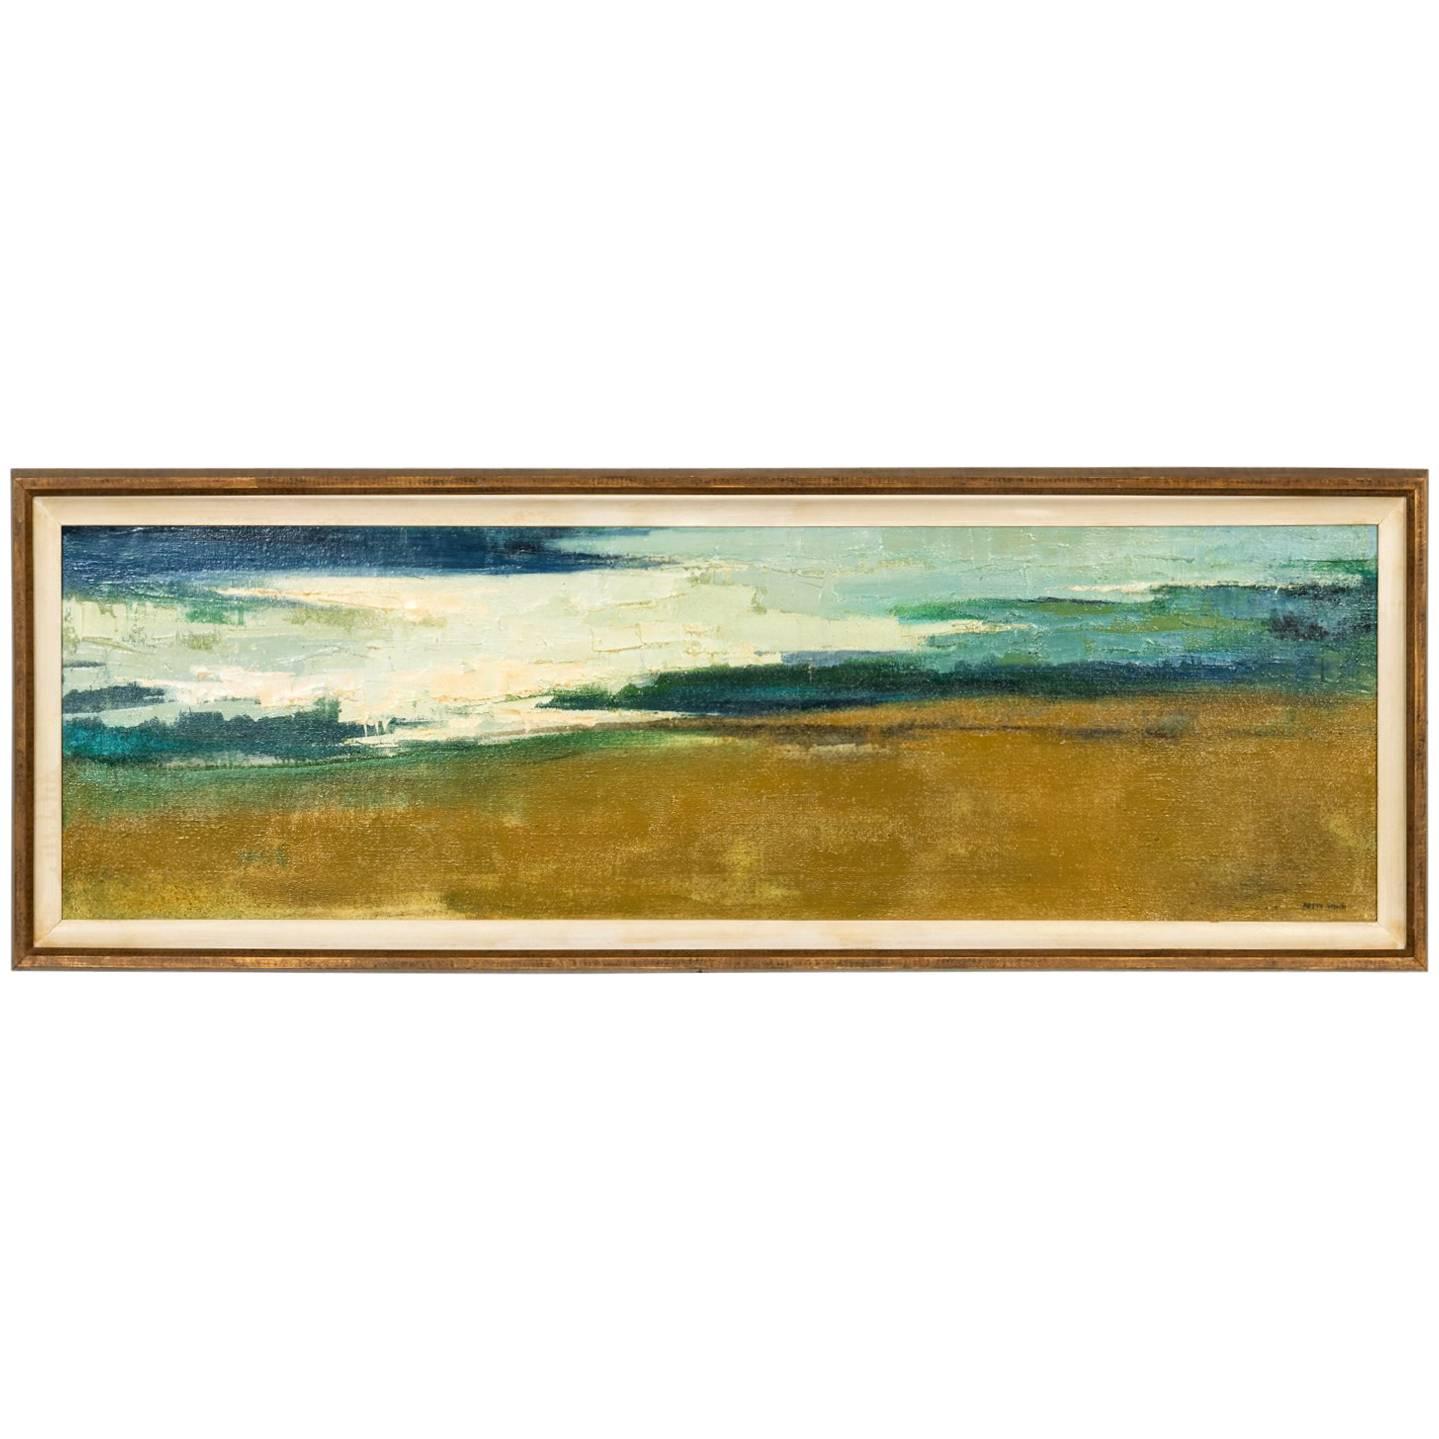 "Sand and Sea" Painting by Betty Winn 'Am. 1916 -2000' For Sale